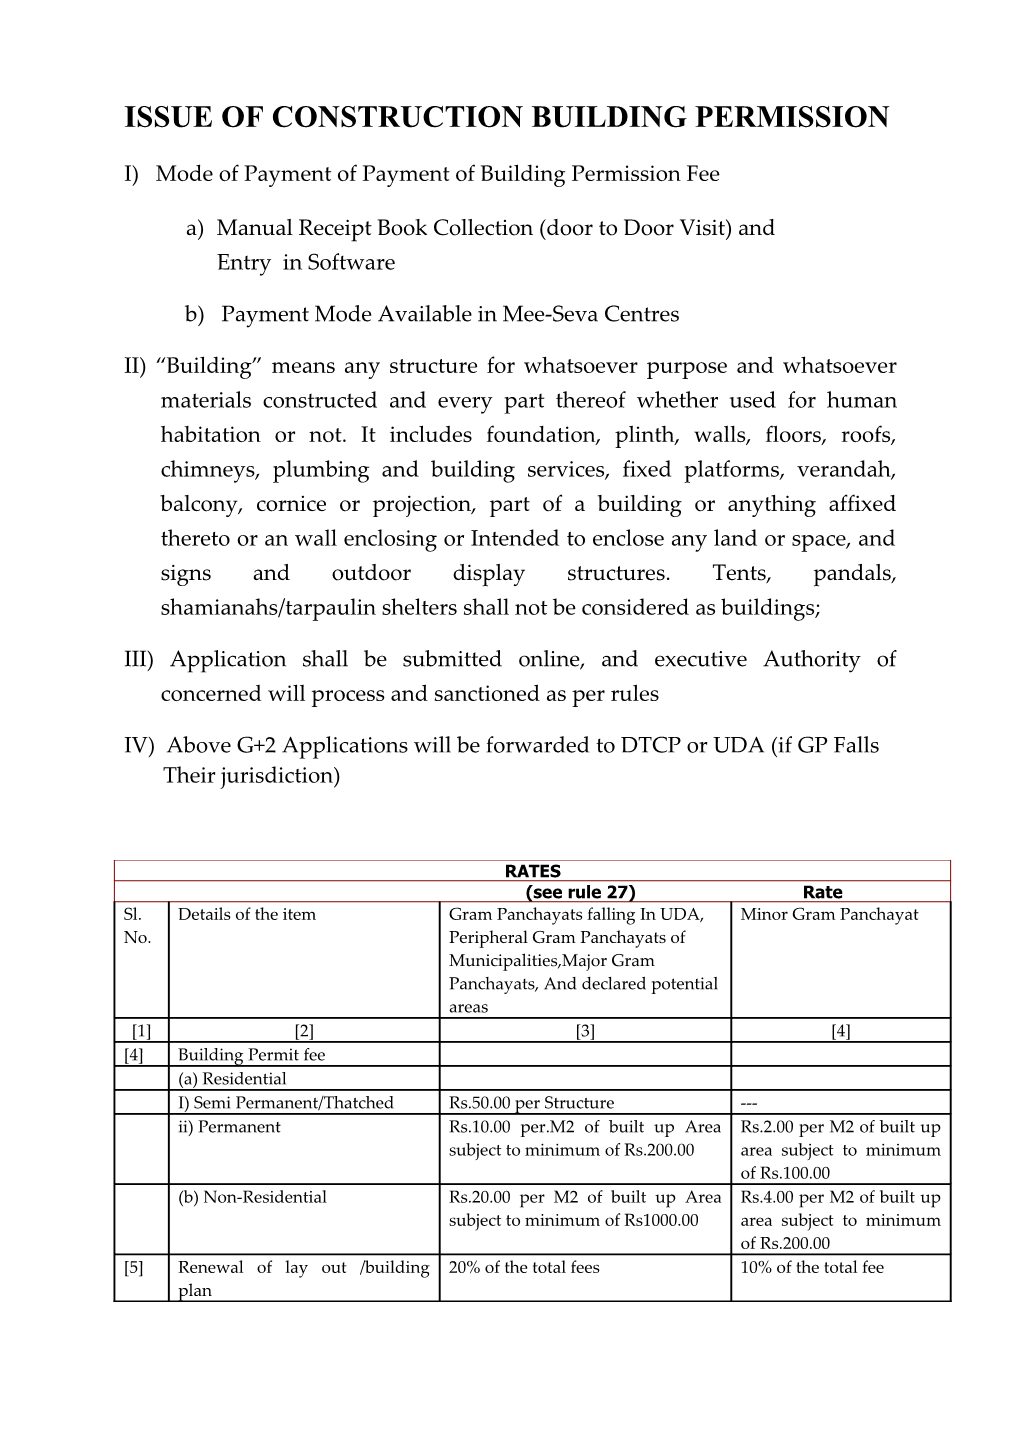 Issue of Construction Building Permission